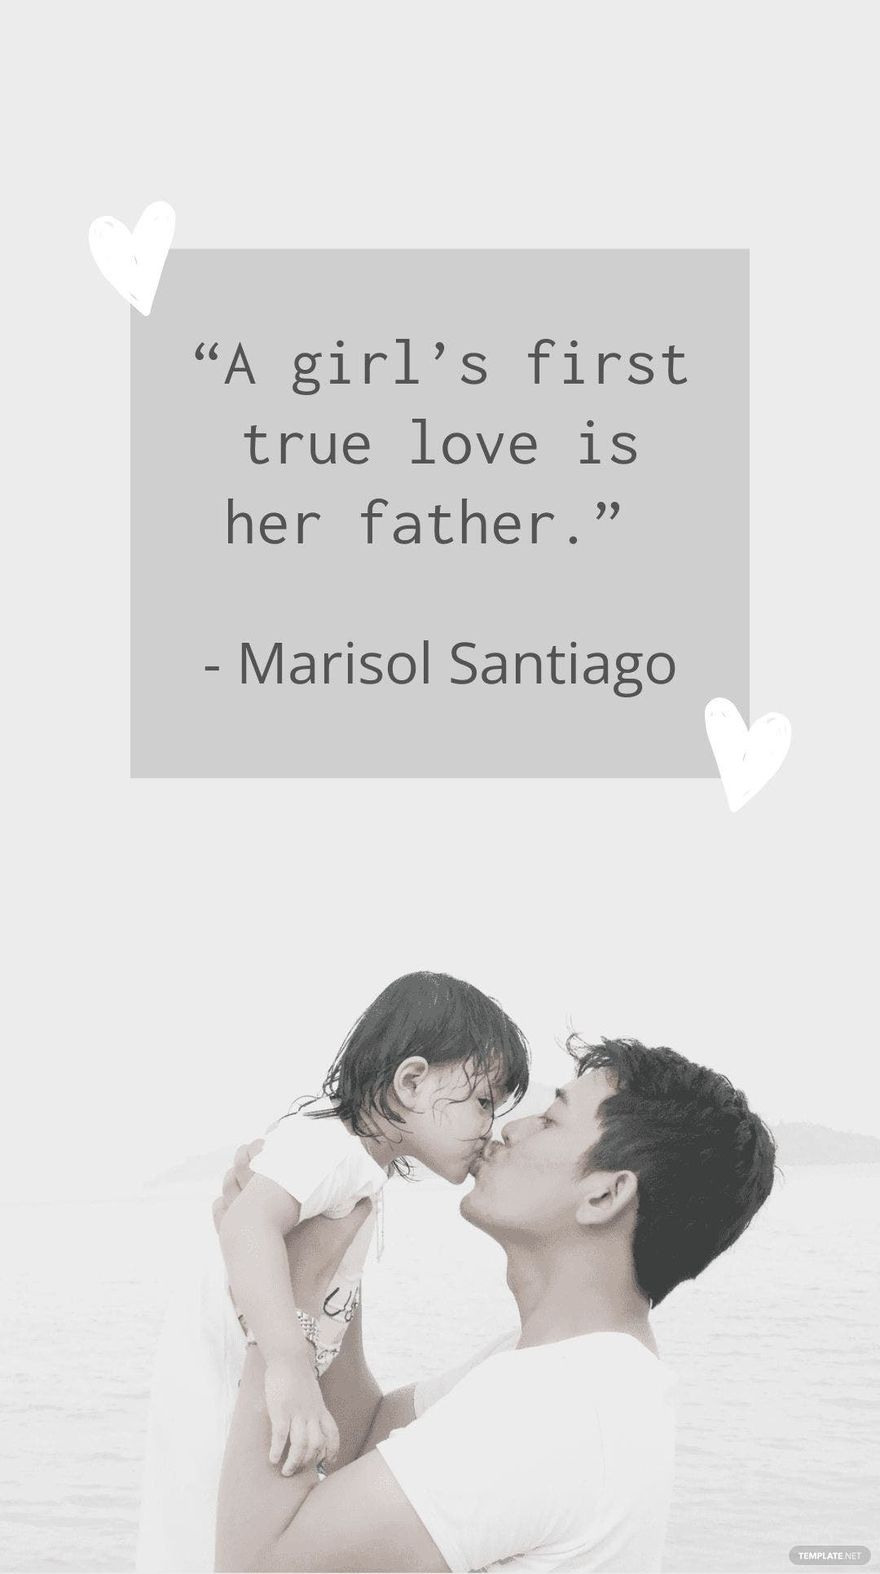 Marisol Santiago  - “A girl’s first true love is her father.” in JPG